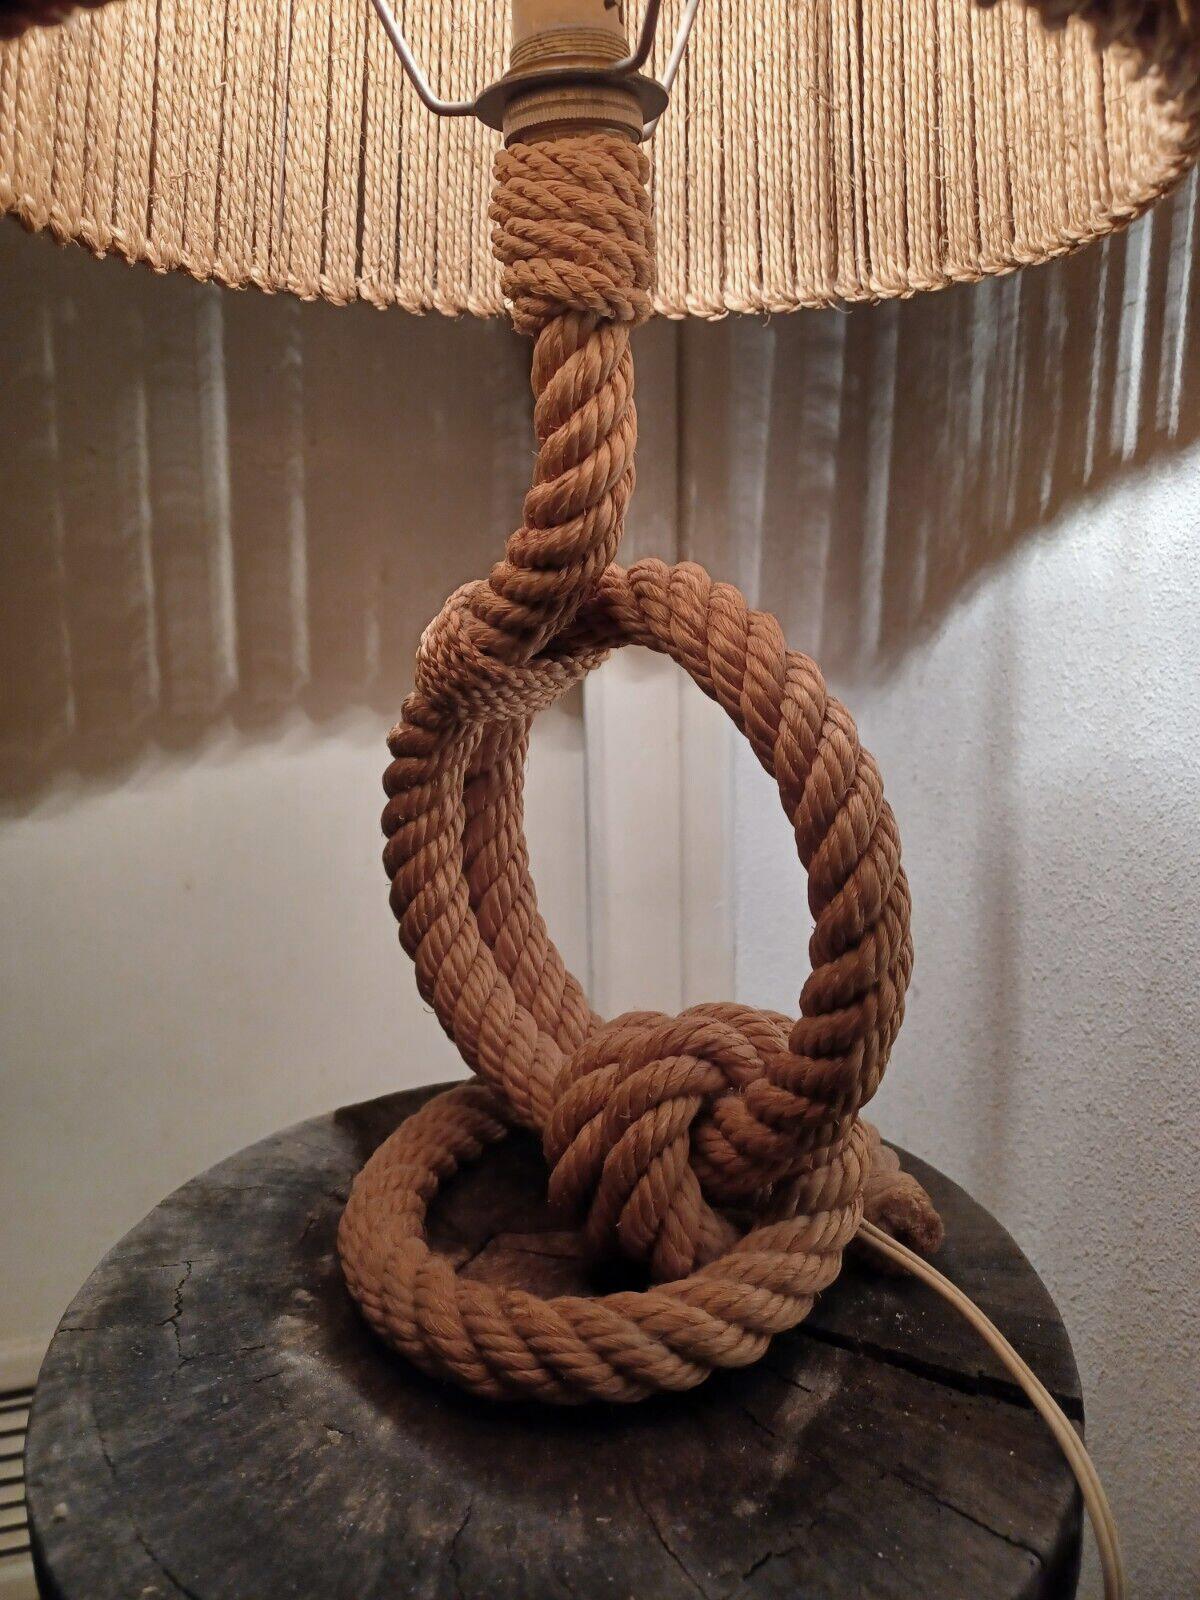 Mid-Century Modern Audoux Minet Rope Table Lamp, 1950 by Adrien Audoux and Frida Minet For Sale